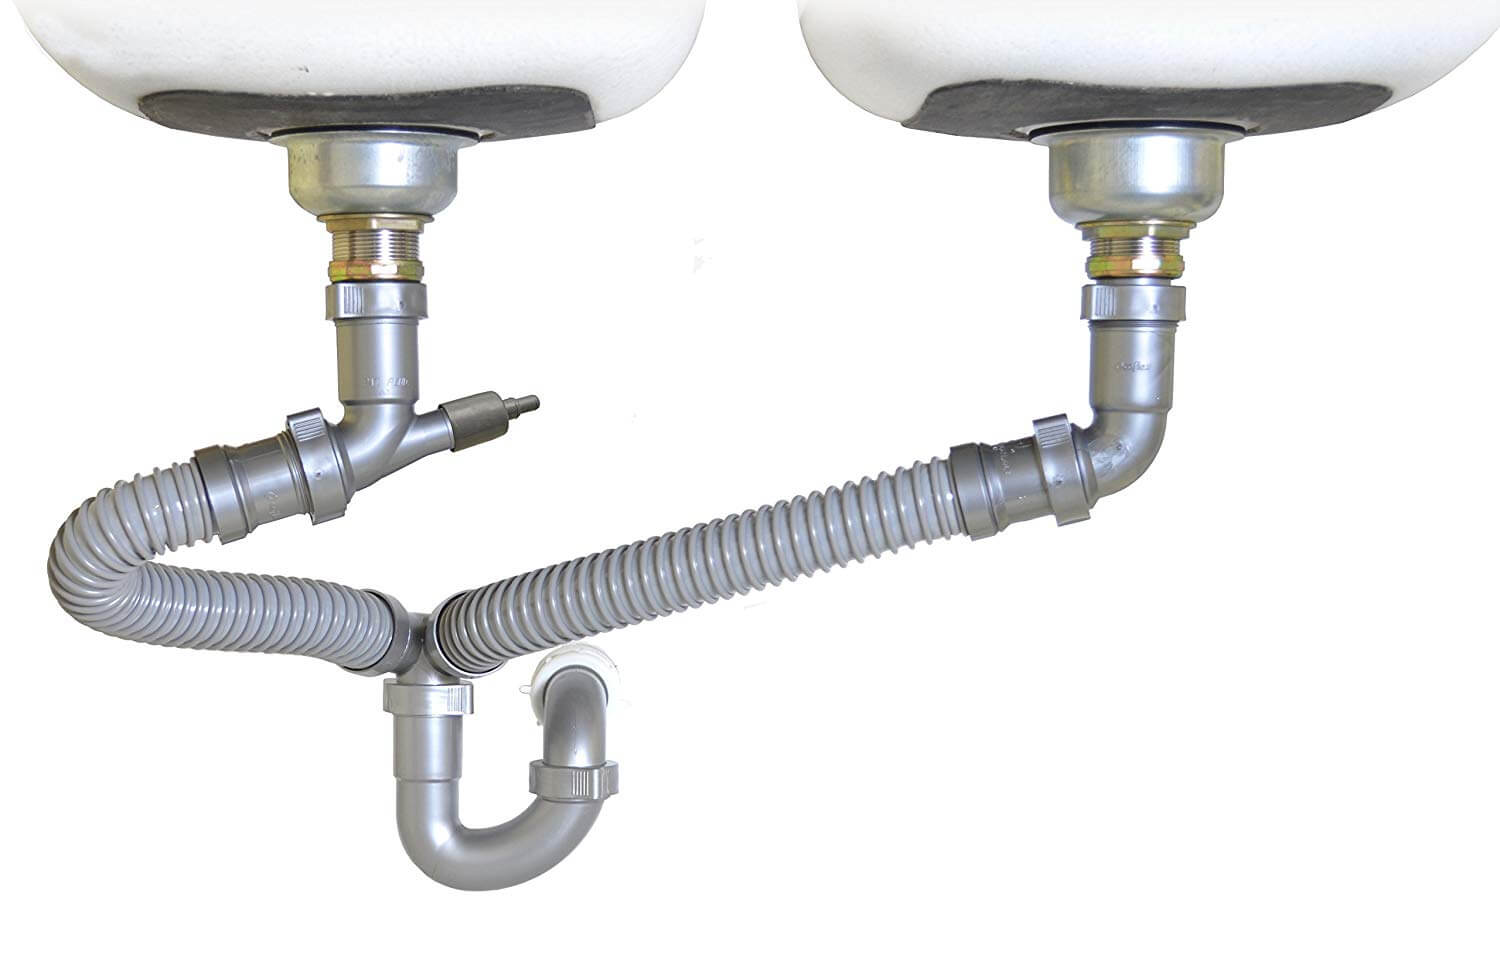 Snappy Trap Double Sink Drain kit:
Kitchen Sink Piping